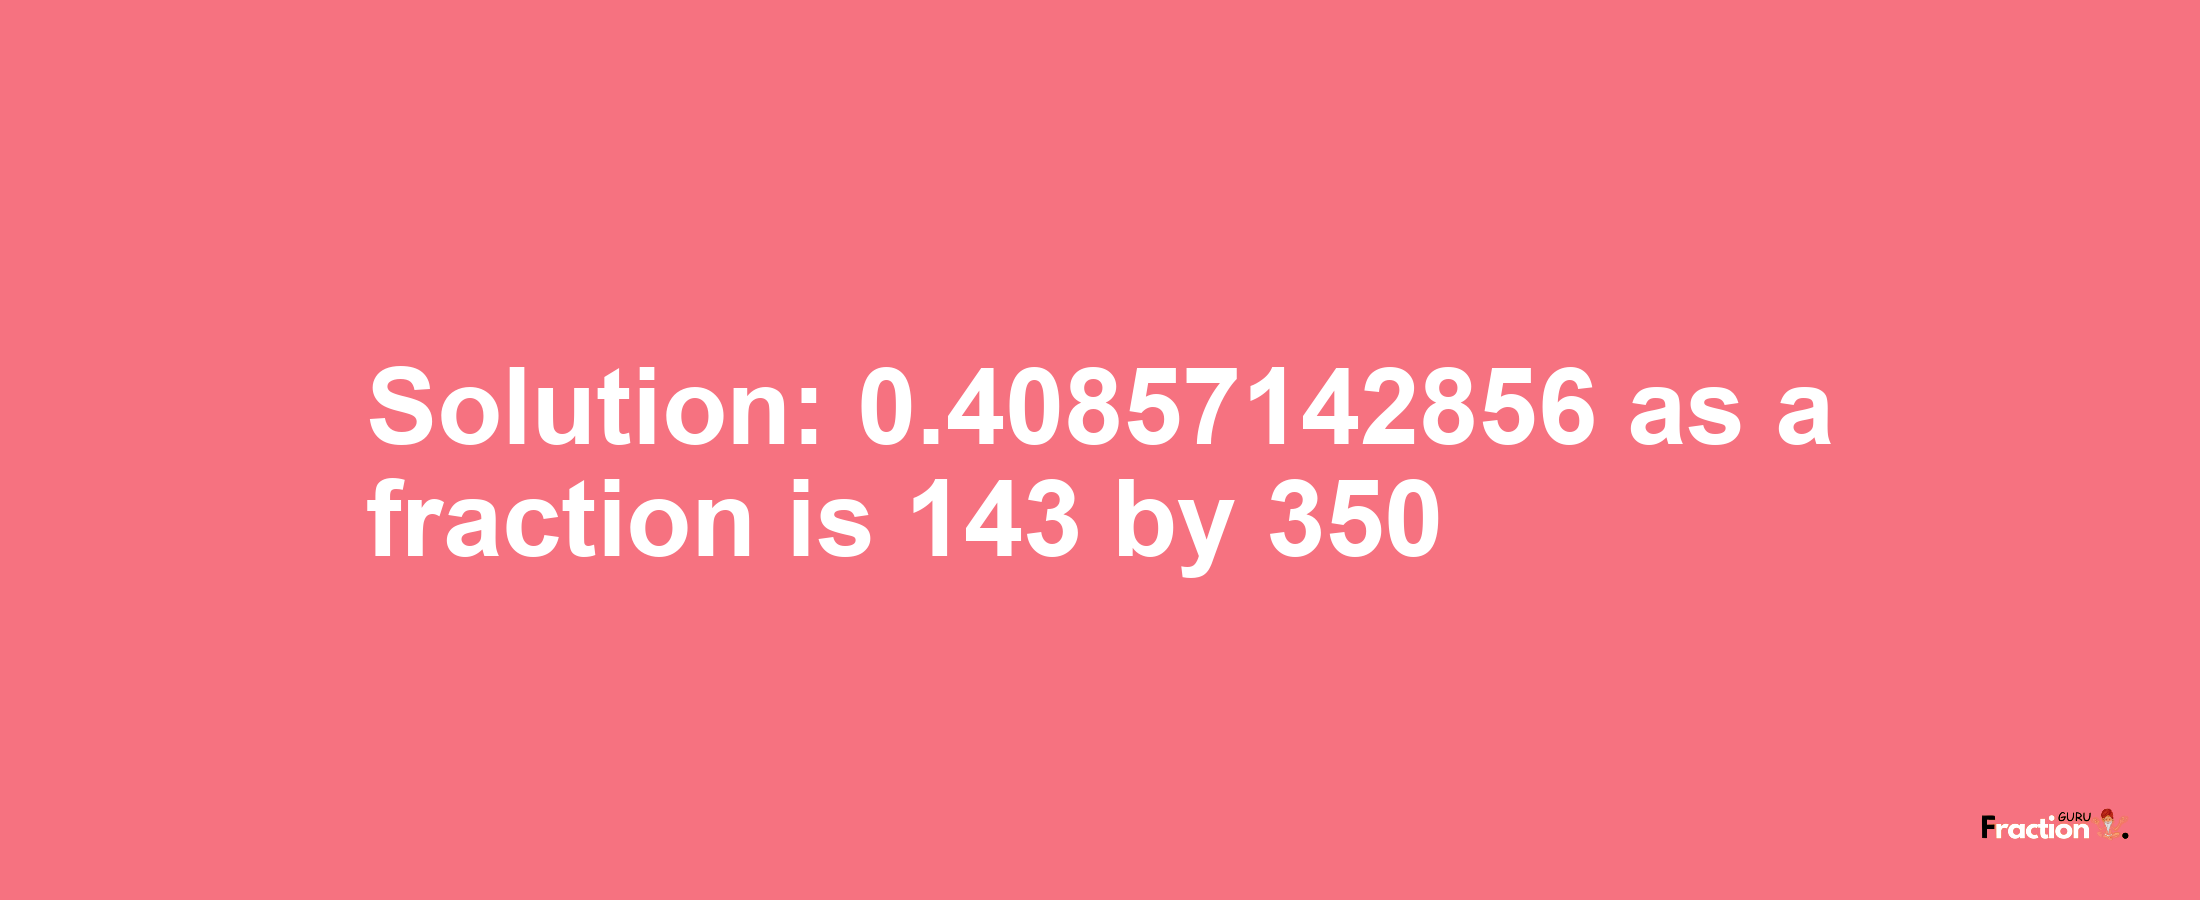 Solution:0.40857142856 as a fraction is 143/350